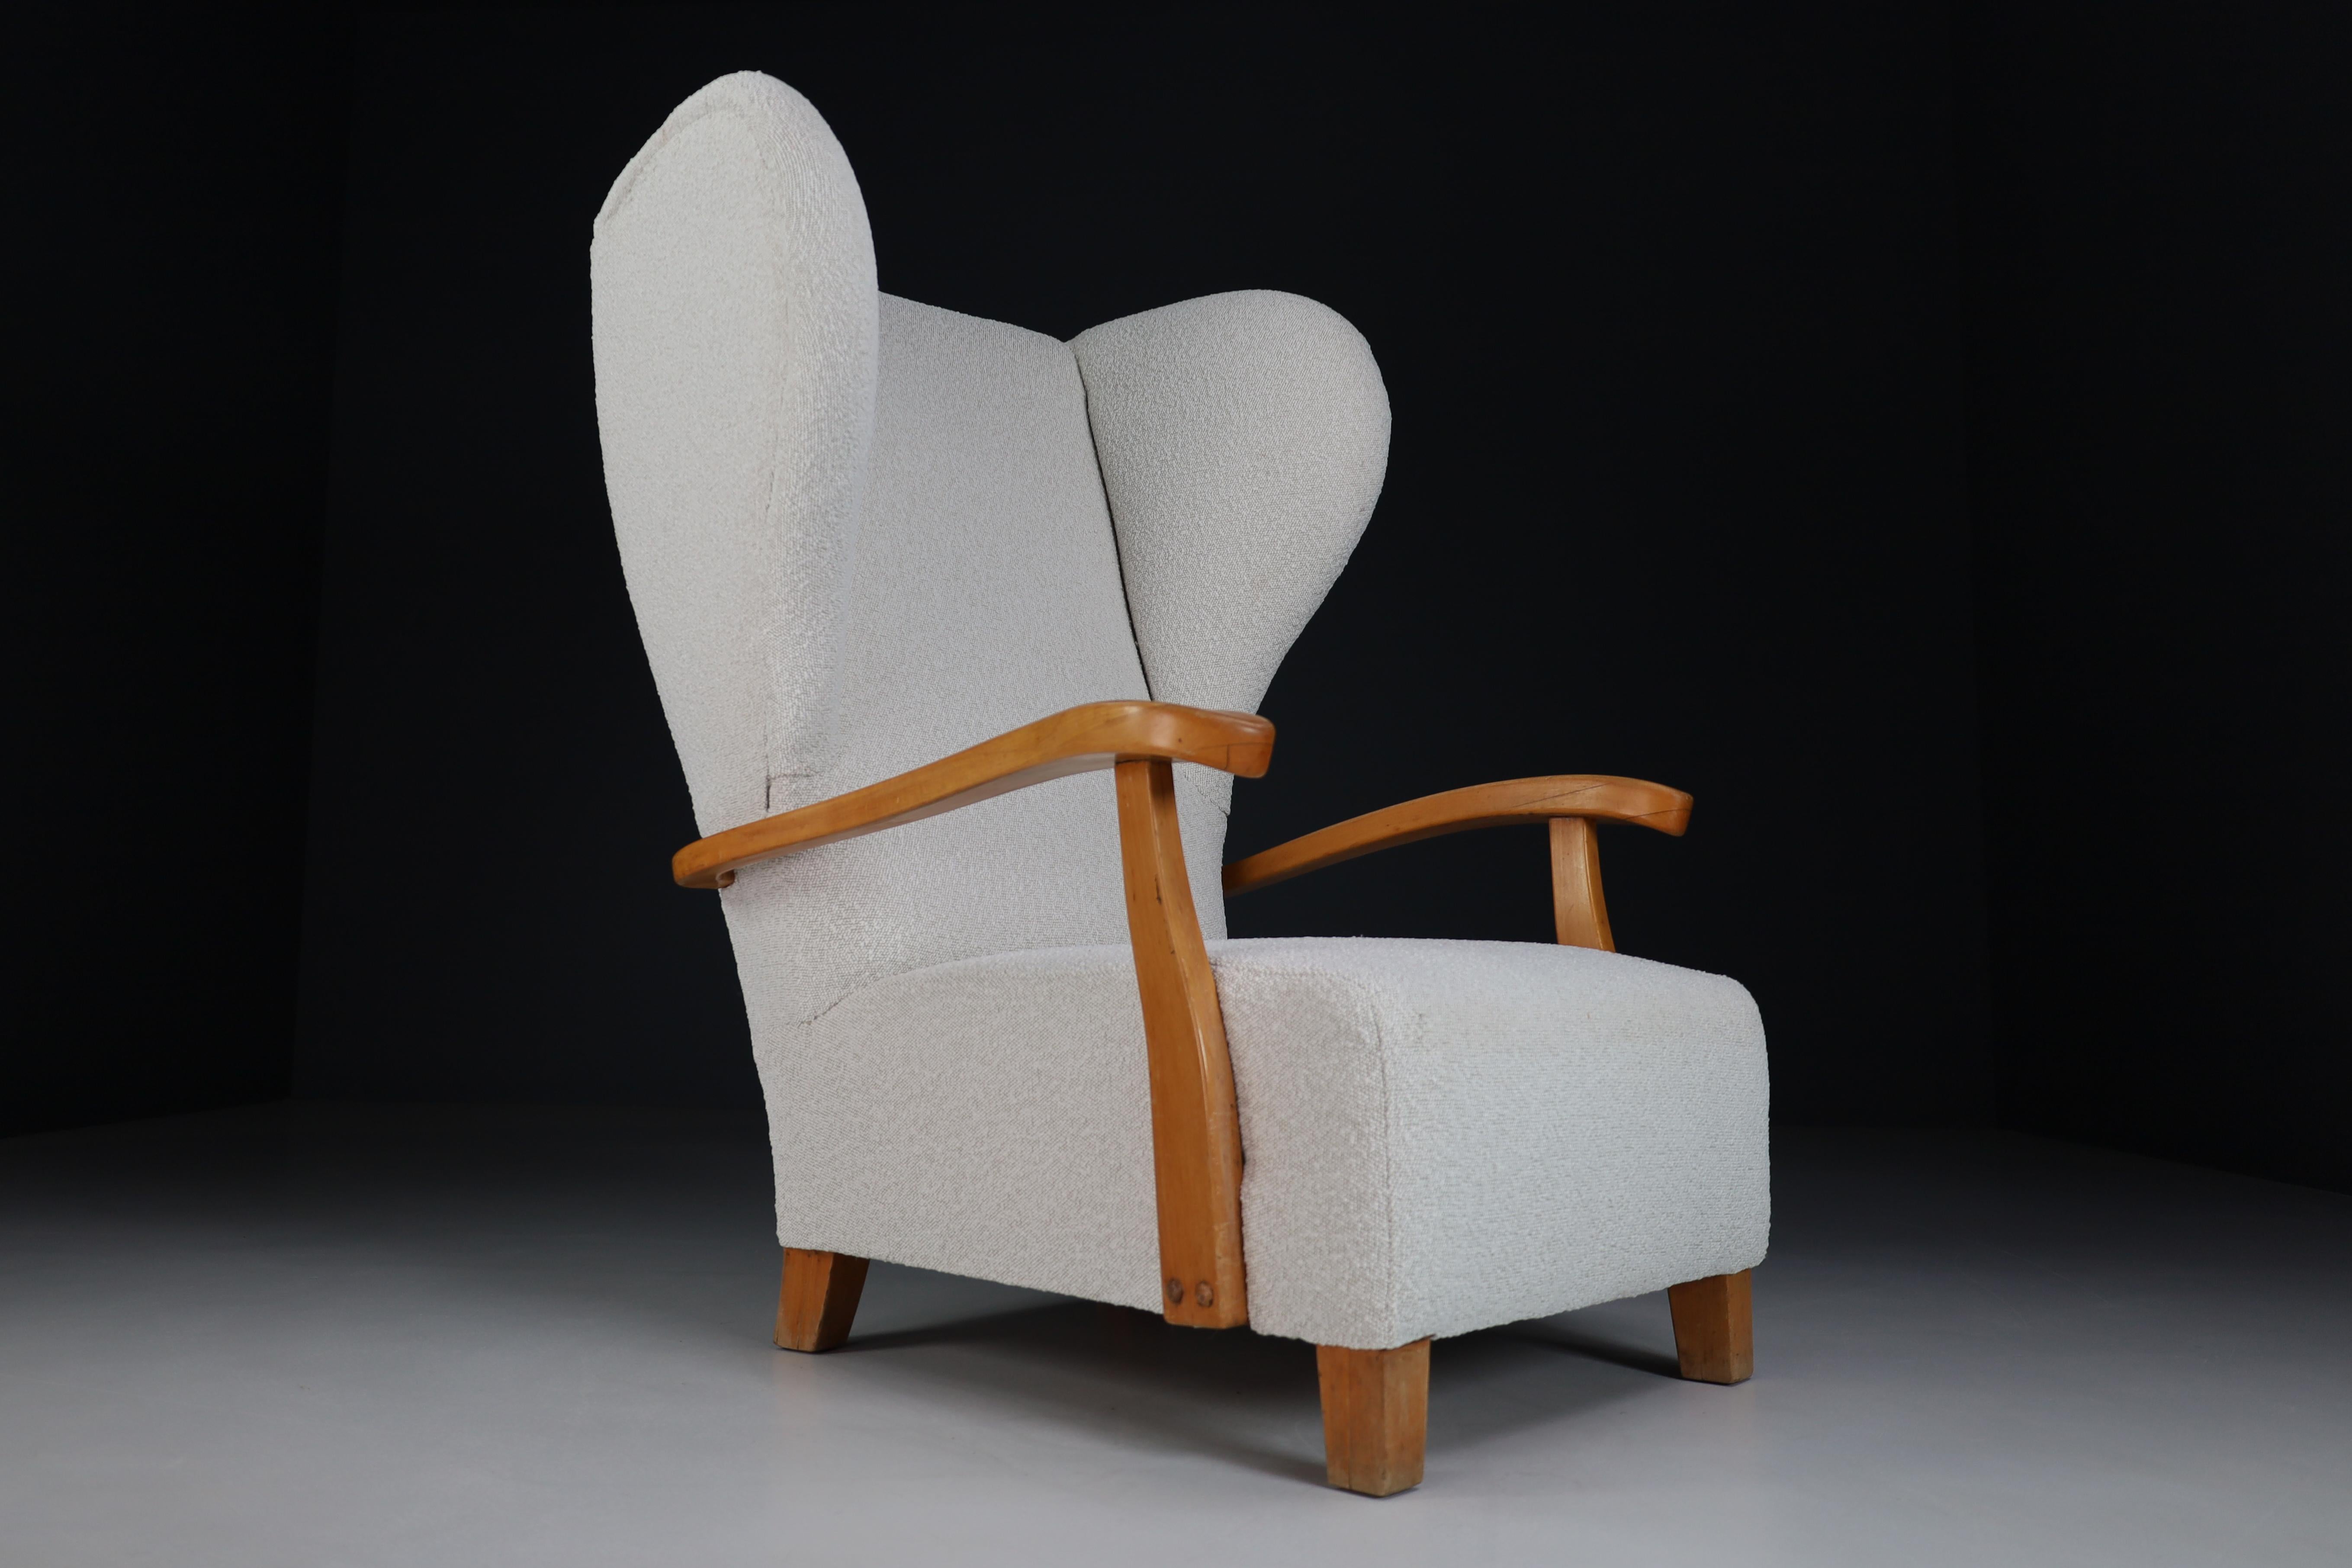 Large monumental midcentury wingback armchair in walnut and re-upholstered bouclé fabric, France 1930s. This monumental Xl size armchair - lounge chair would make an eye-catching addition to any interior such as living room, family room, screening